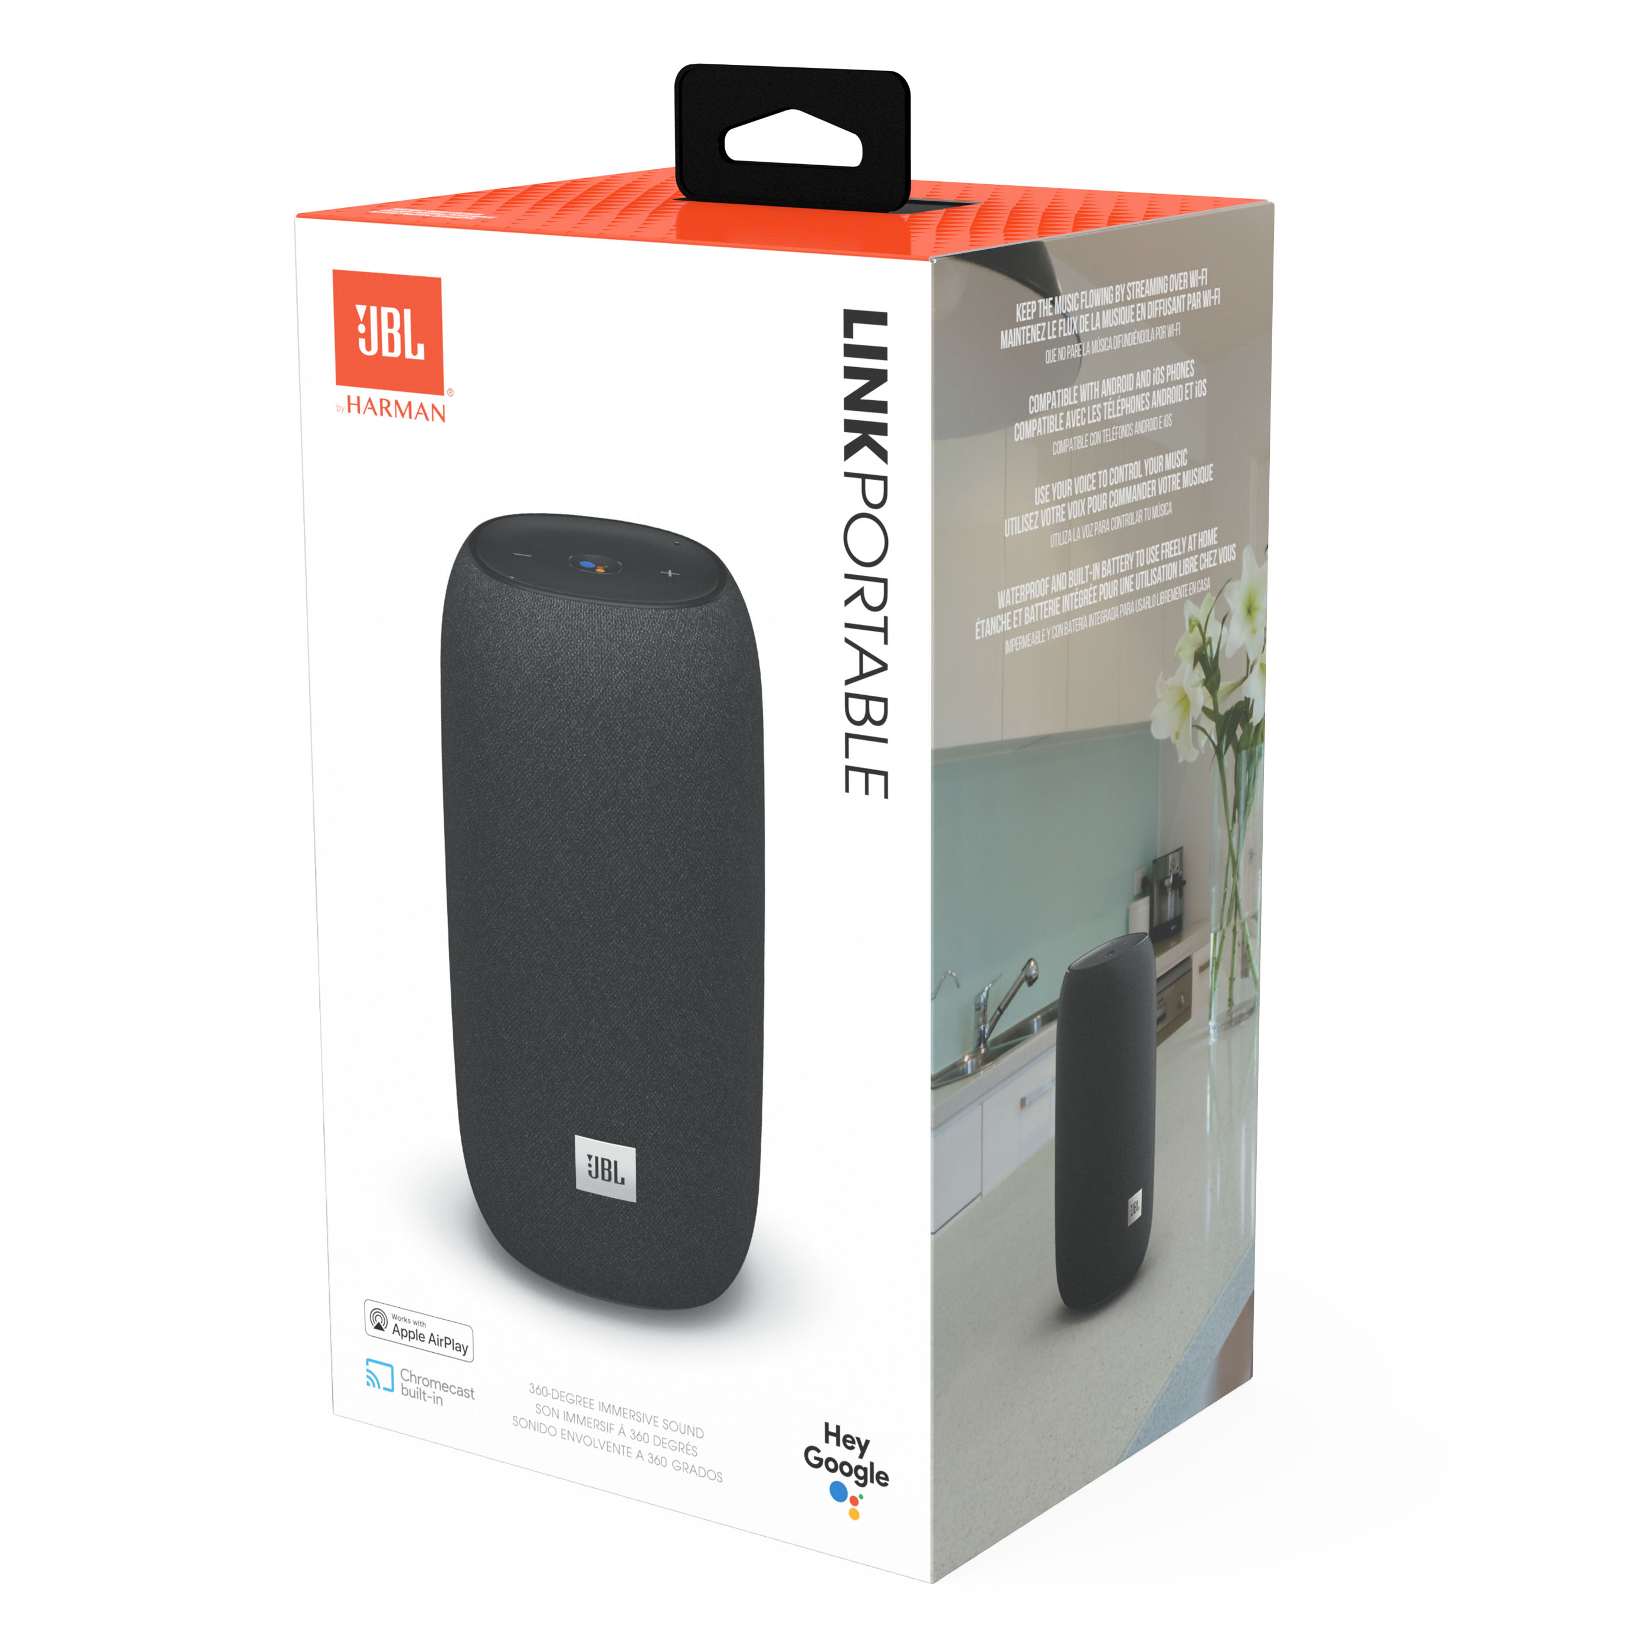 JBL Link Smart Portable Wi-Fi and Bluetooth Speaker w Google Assistant - Gray - image 3 of 5